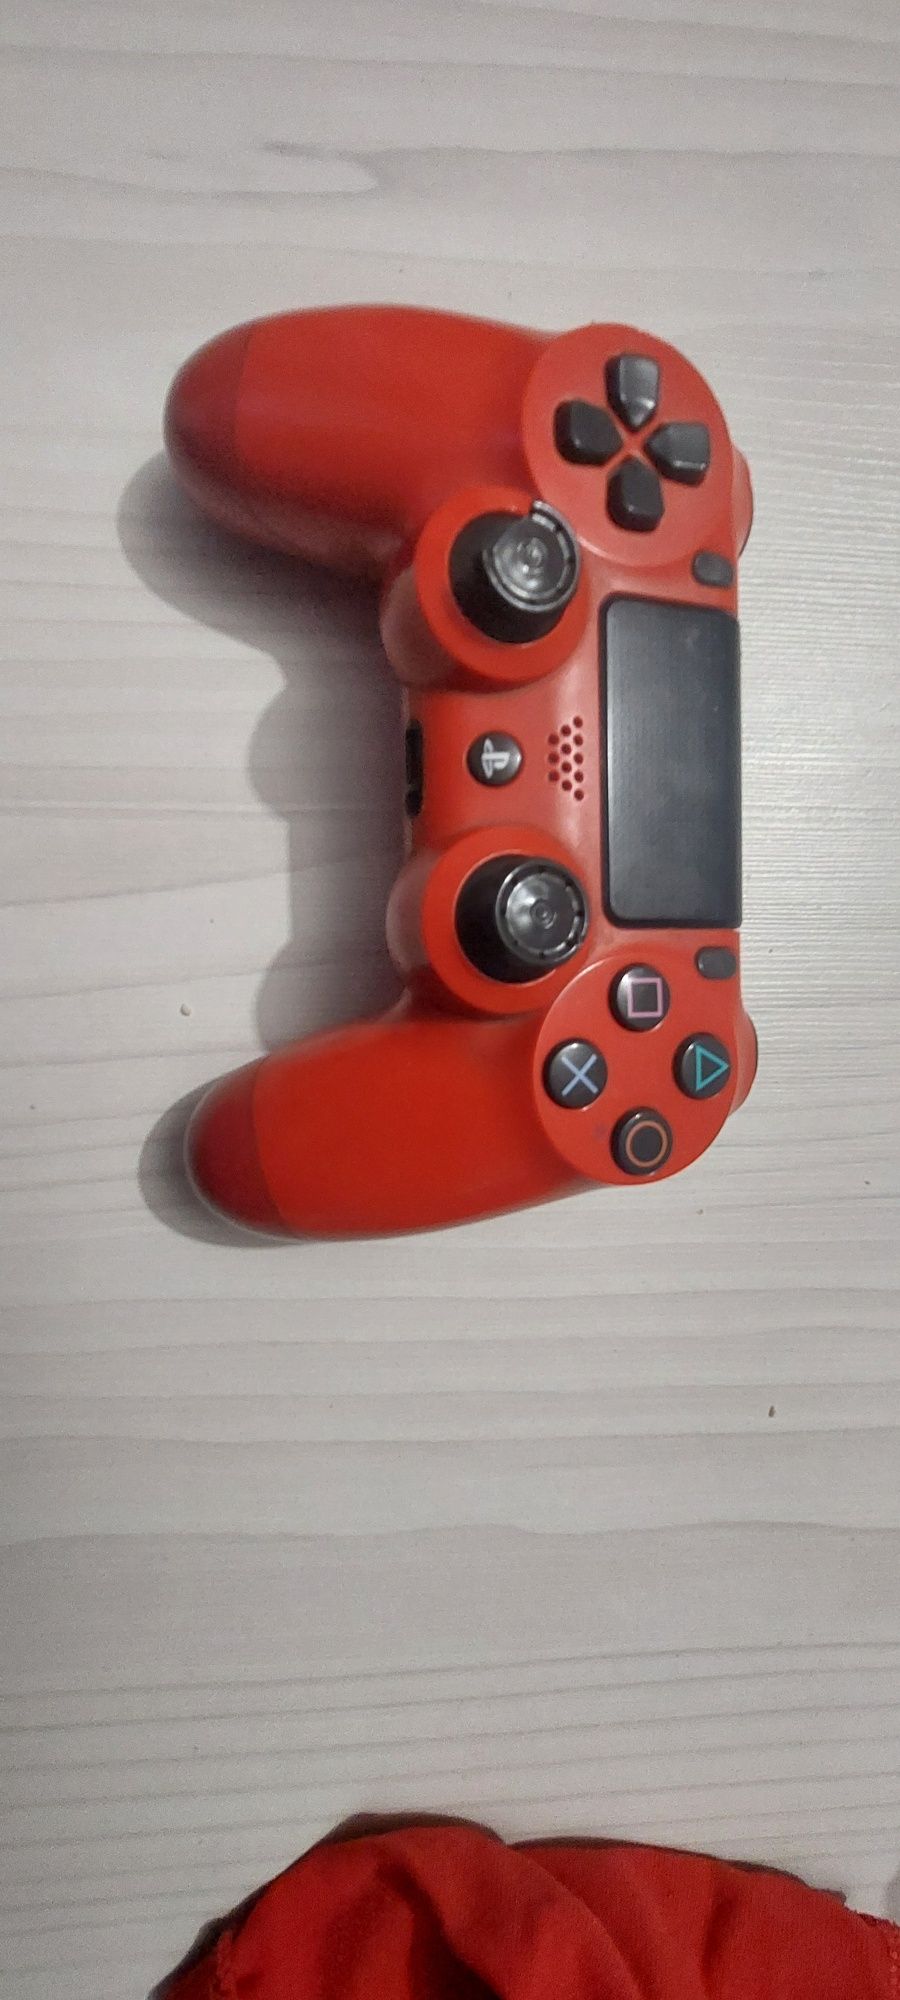 Maneta ps4 red and black